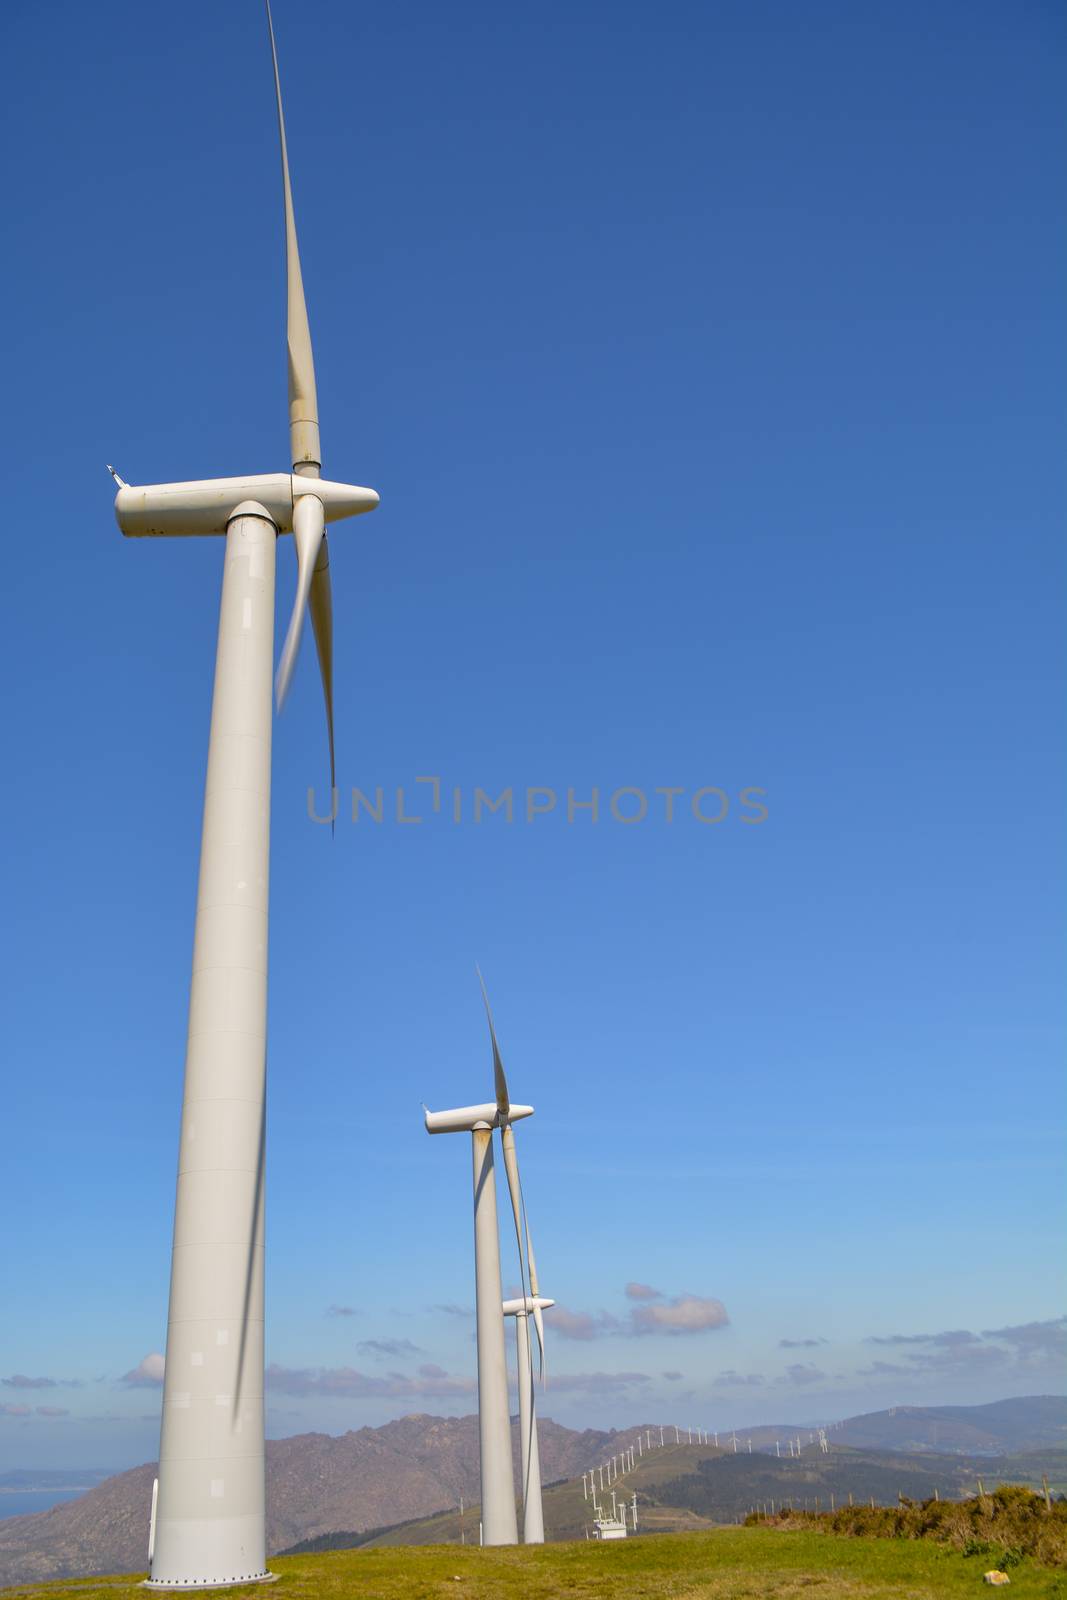 Landscape with lined up wind turbines of a wind farm on a mountain rig. Sustainable energy